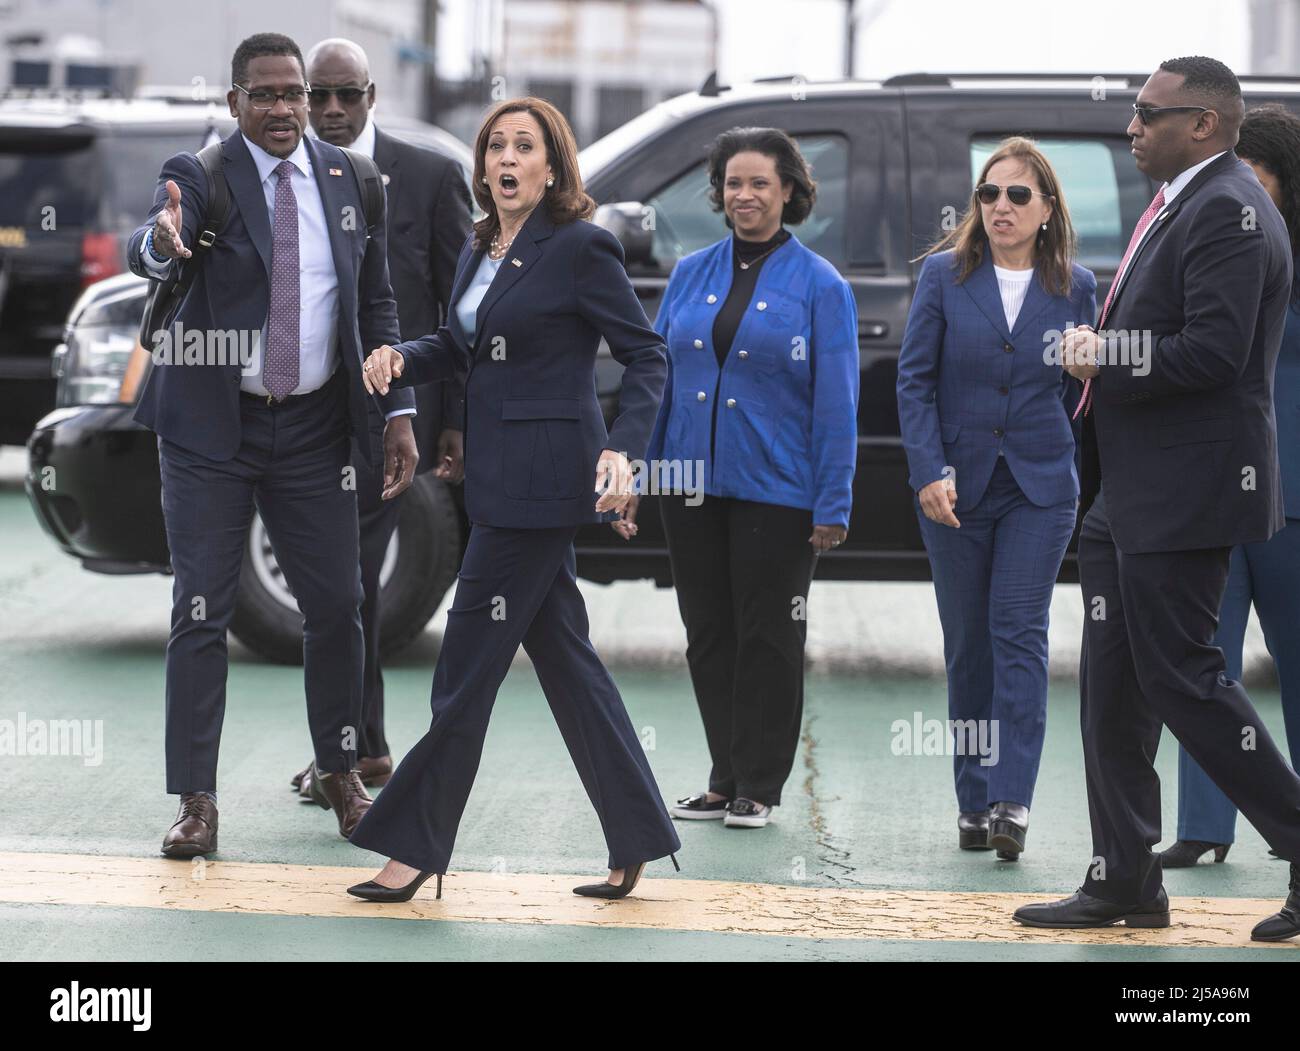 United States Vice President Kamala Harris arrives in San Francisco on Thursday, April 21, 2022. Harris is visiting the University of California San Francisco Medical center and the EMBRACE program of prenatal and postnatal care for black women. Credit: Terry Schmitt/Pool via CNP Stock Photo